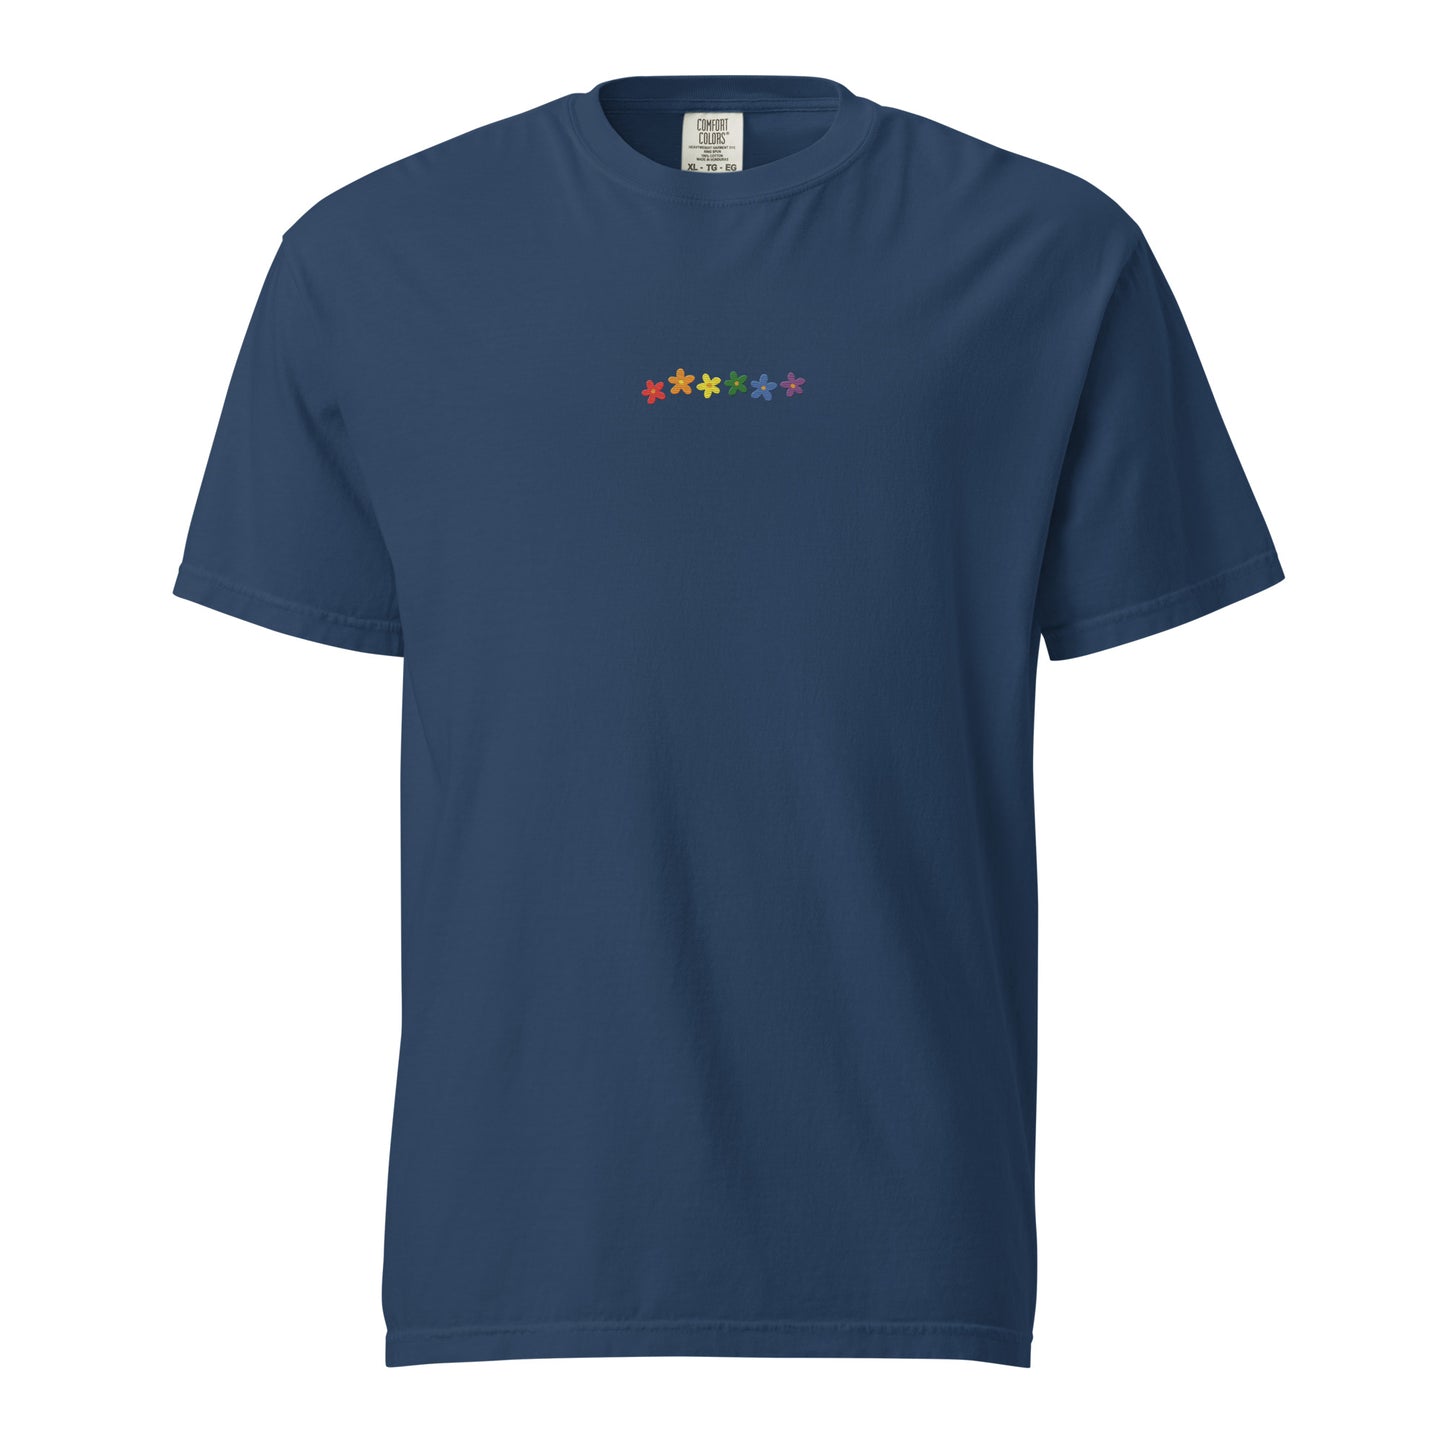 the Pride t-shirt